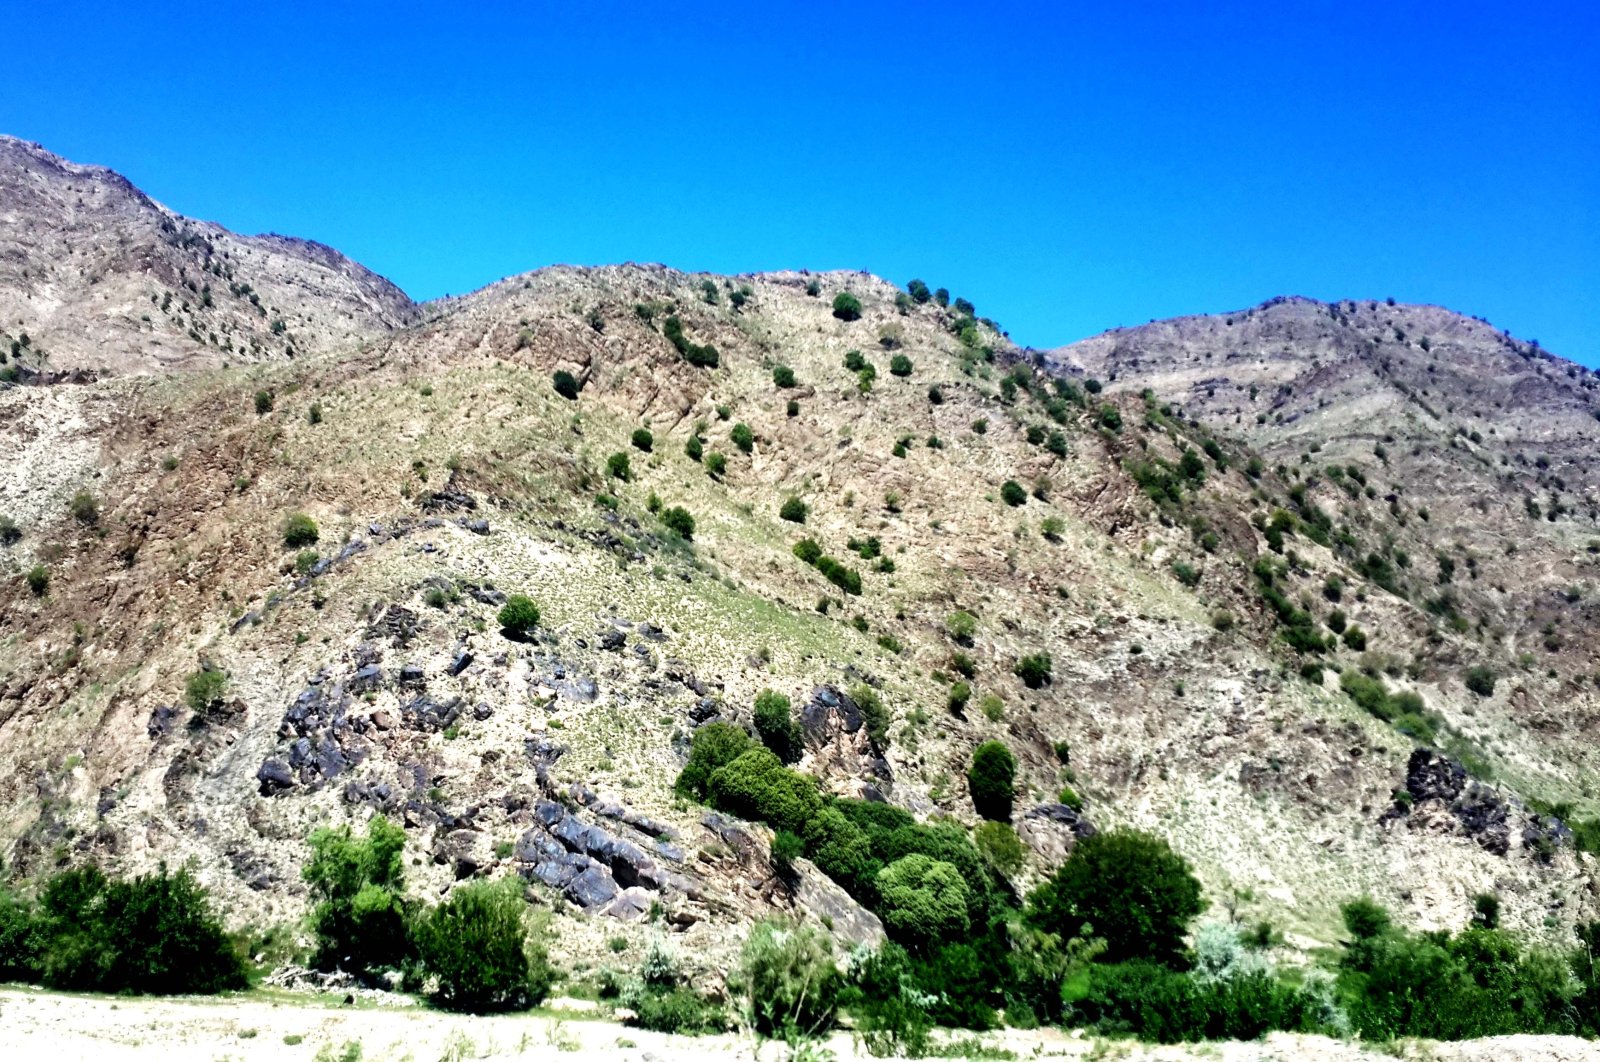 This undated photo shows a general view of the mountainous region of Khost, Afghanistan. (Shutterstock Photo)